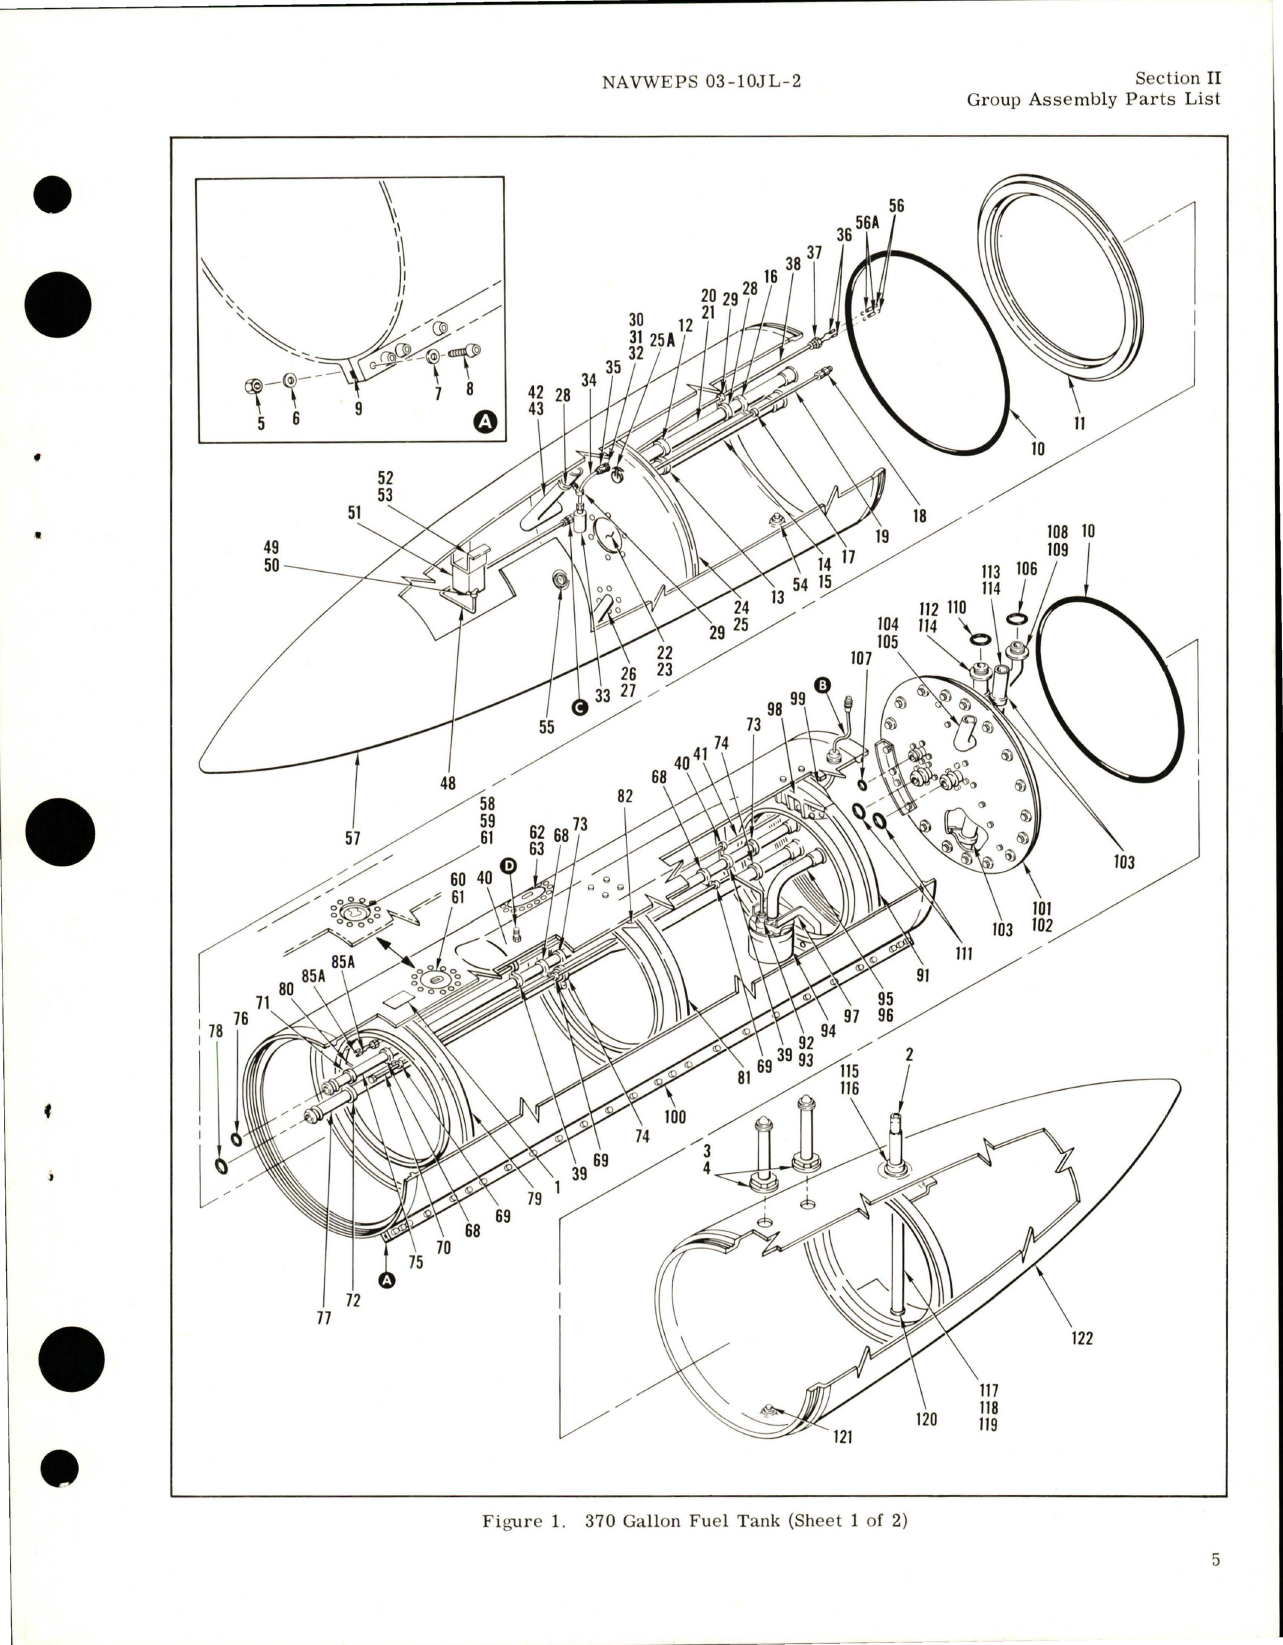 Sample page 7 from AirCorps Library document: Illustrated Parts Breakdown for Fuel Tanks - 370 Gallon - Parts 507100 and 501700-501